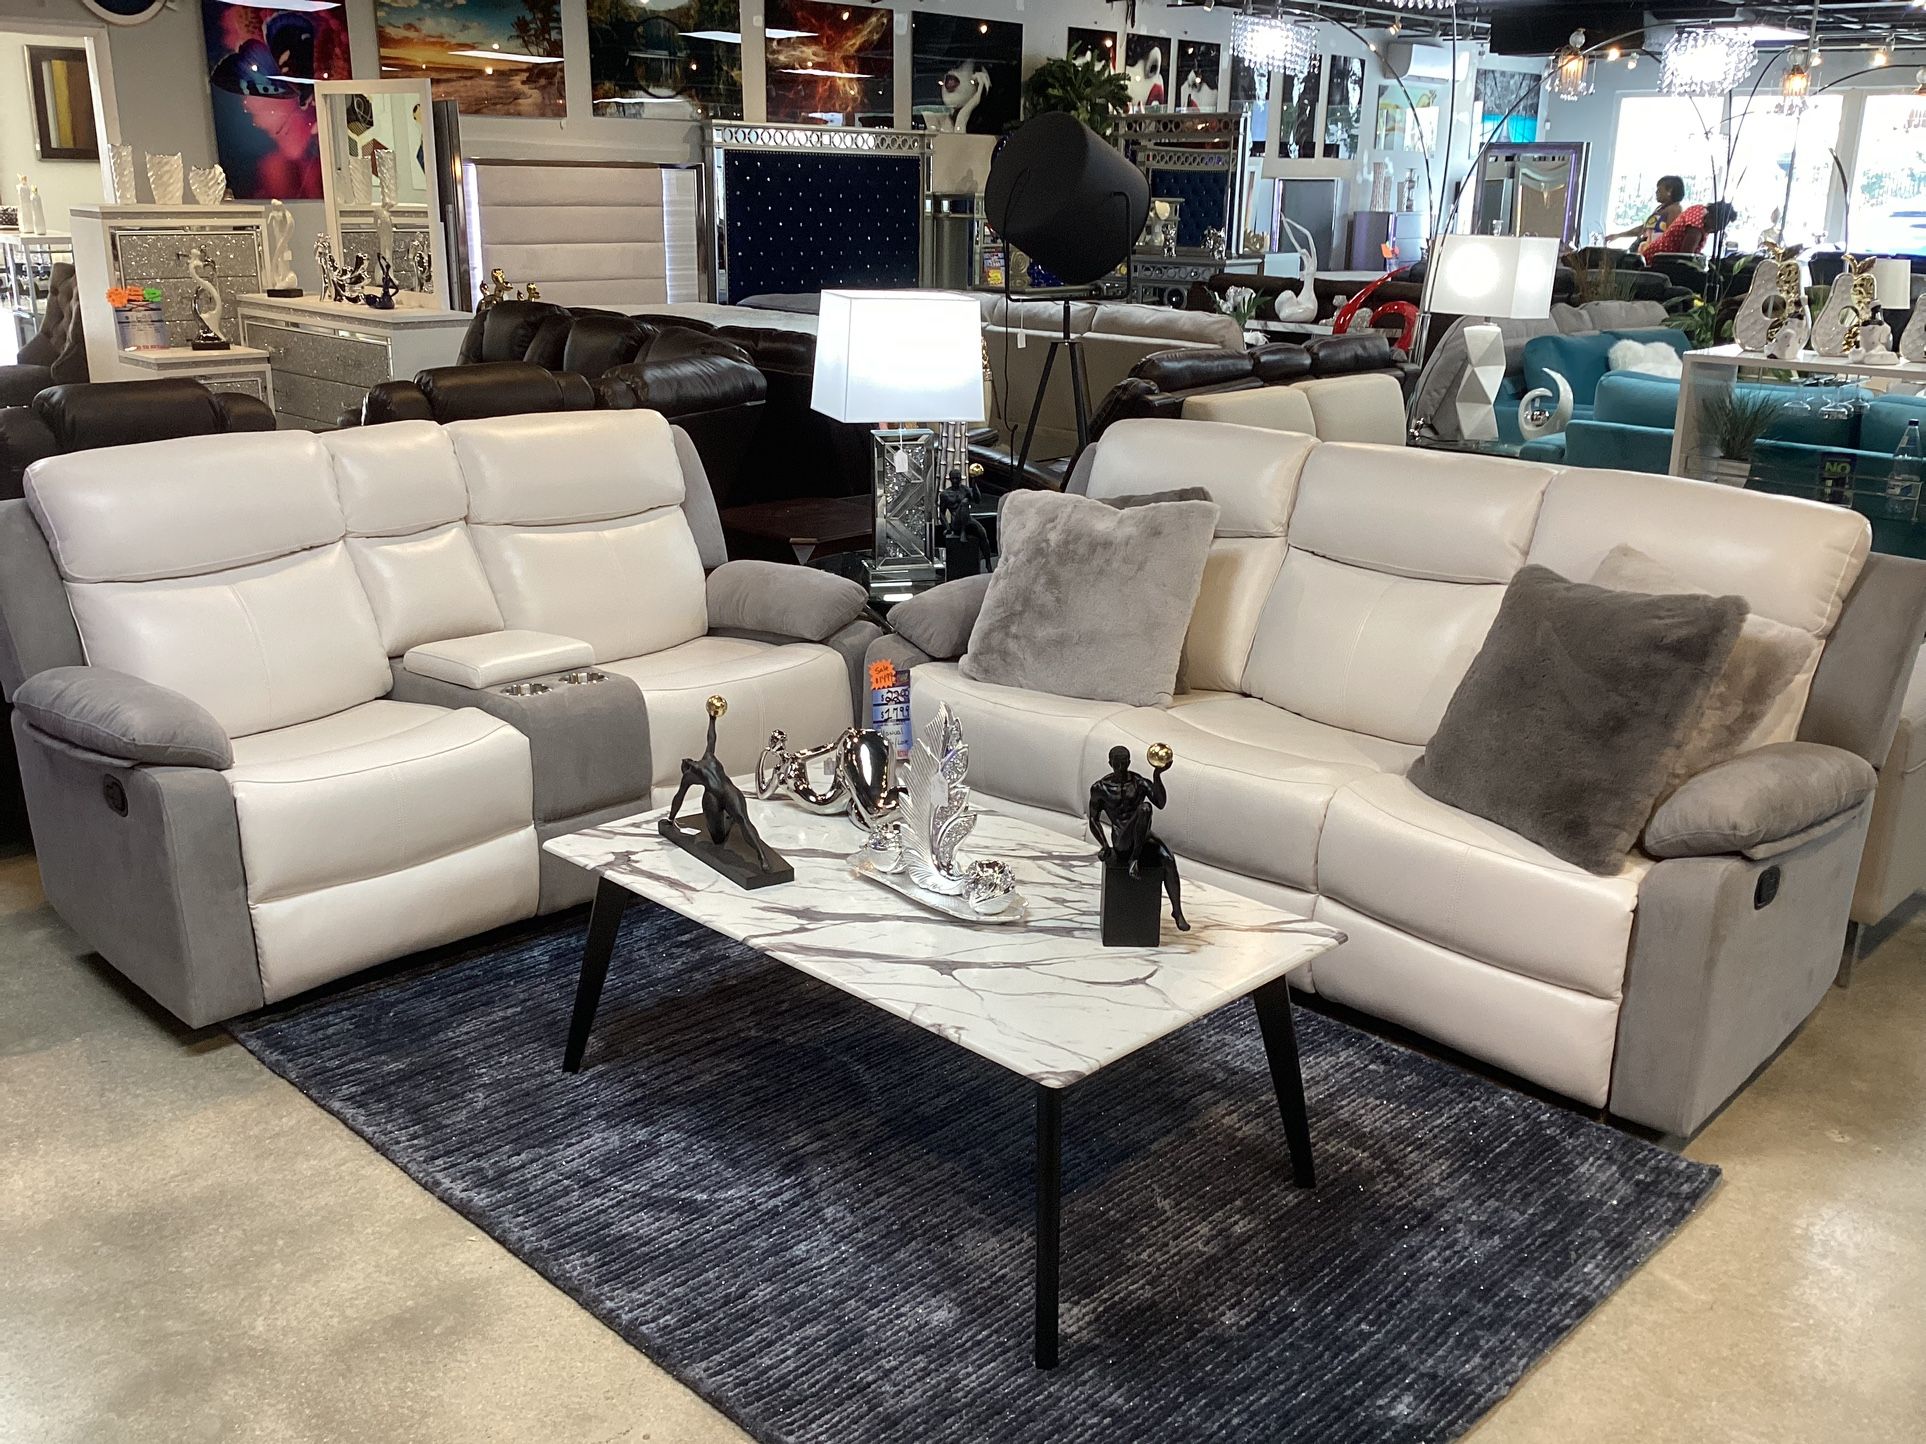 Beautiful Sofa & Loveseat Non Power 4Manuel Recliners On Sale For $1499 Color White And Gray Are Available.